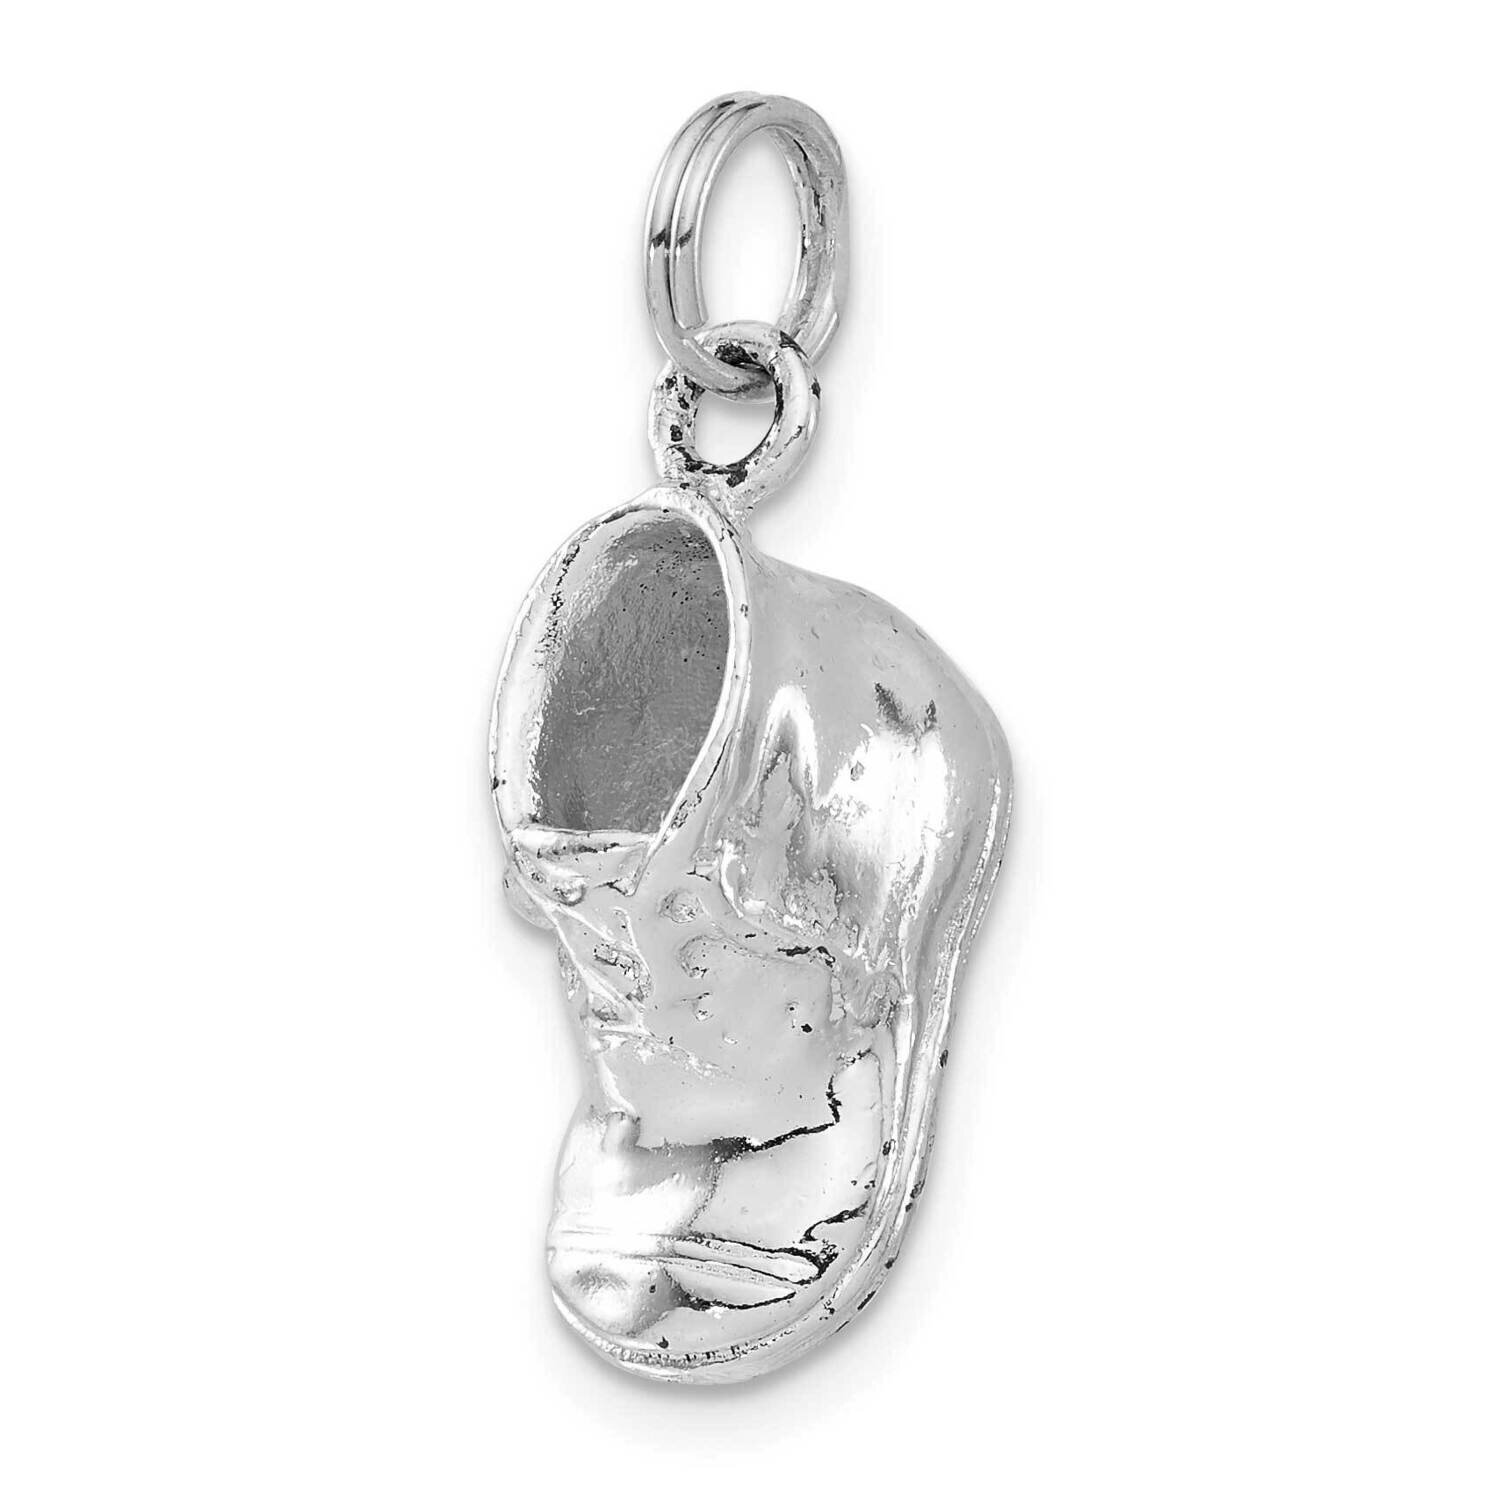 3-D Polished Baby Shoe Charm Sterling Silver QC4608